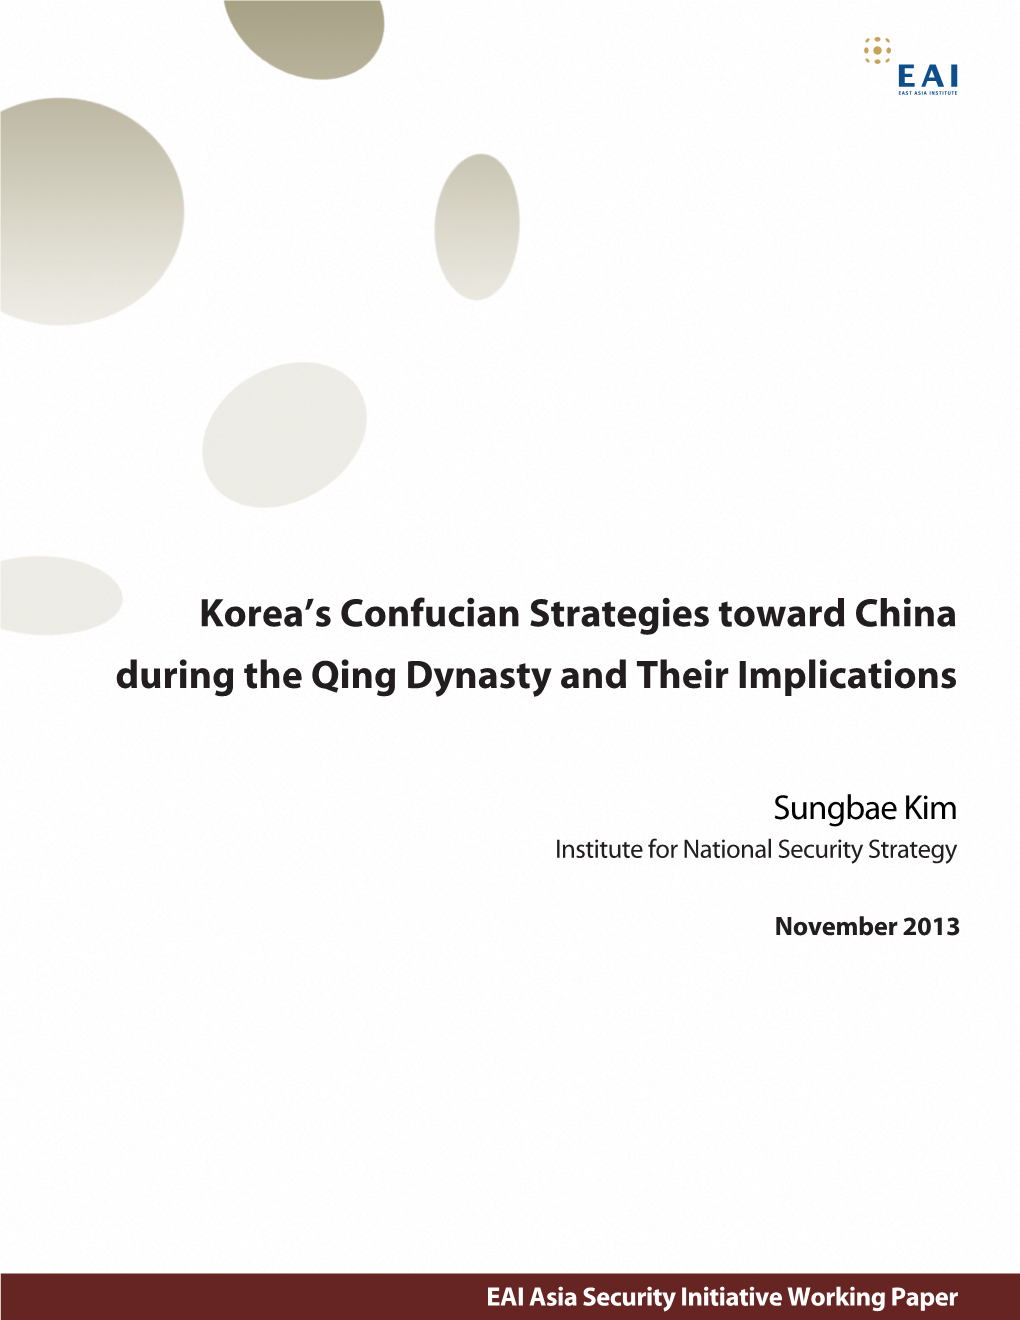 Korea's Confucian Strategies Toward China During the Qing Dynasty And